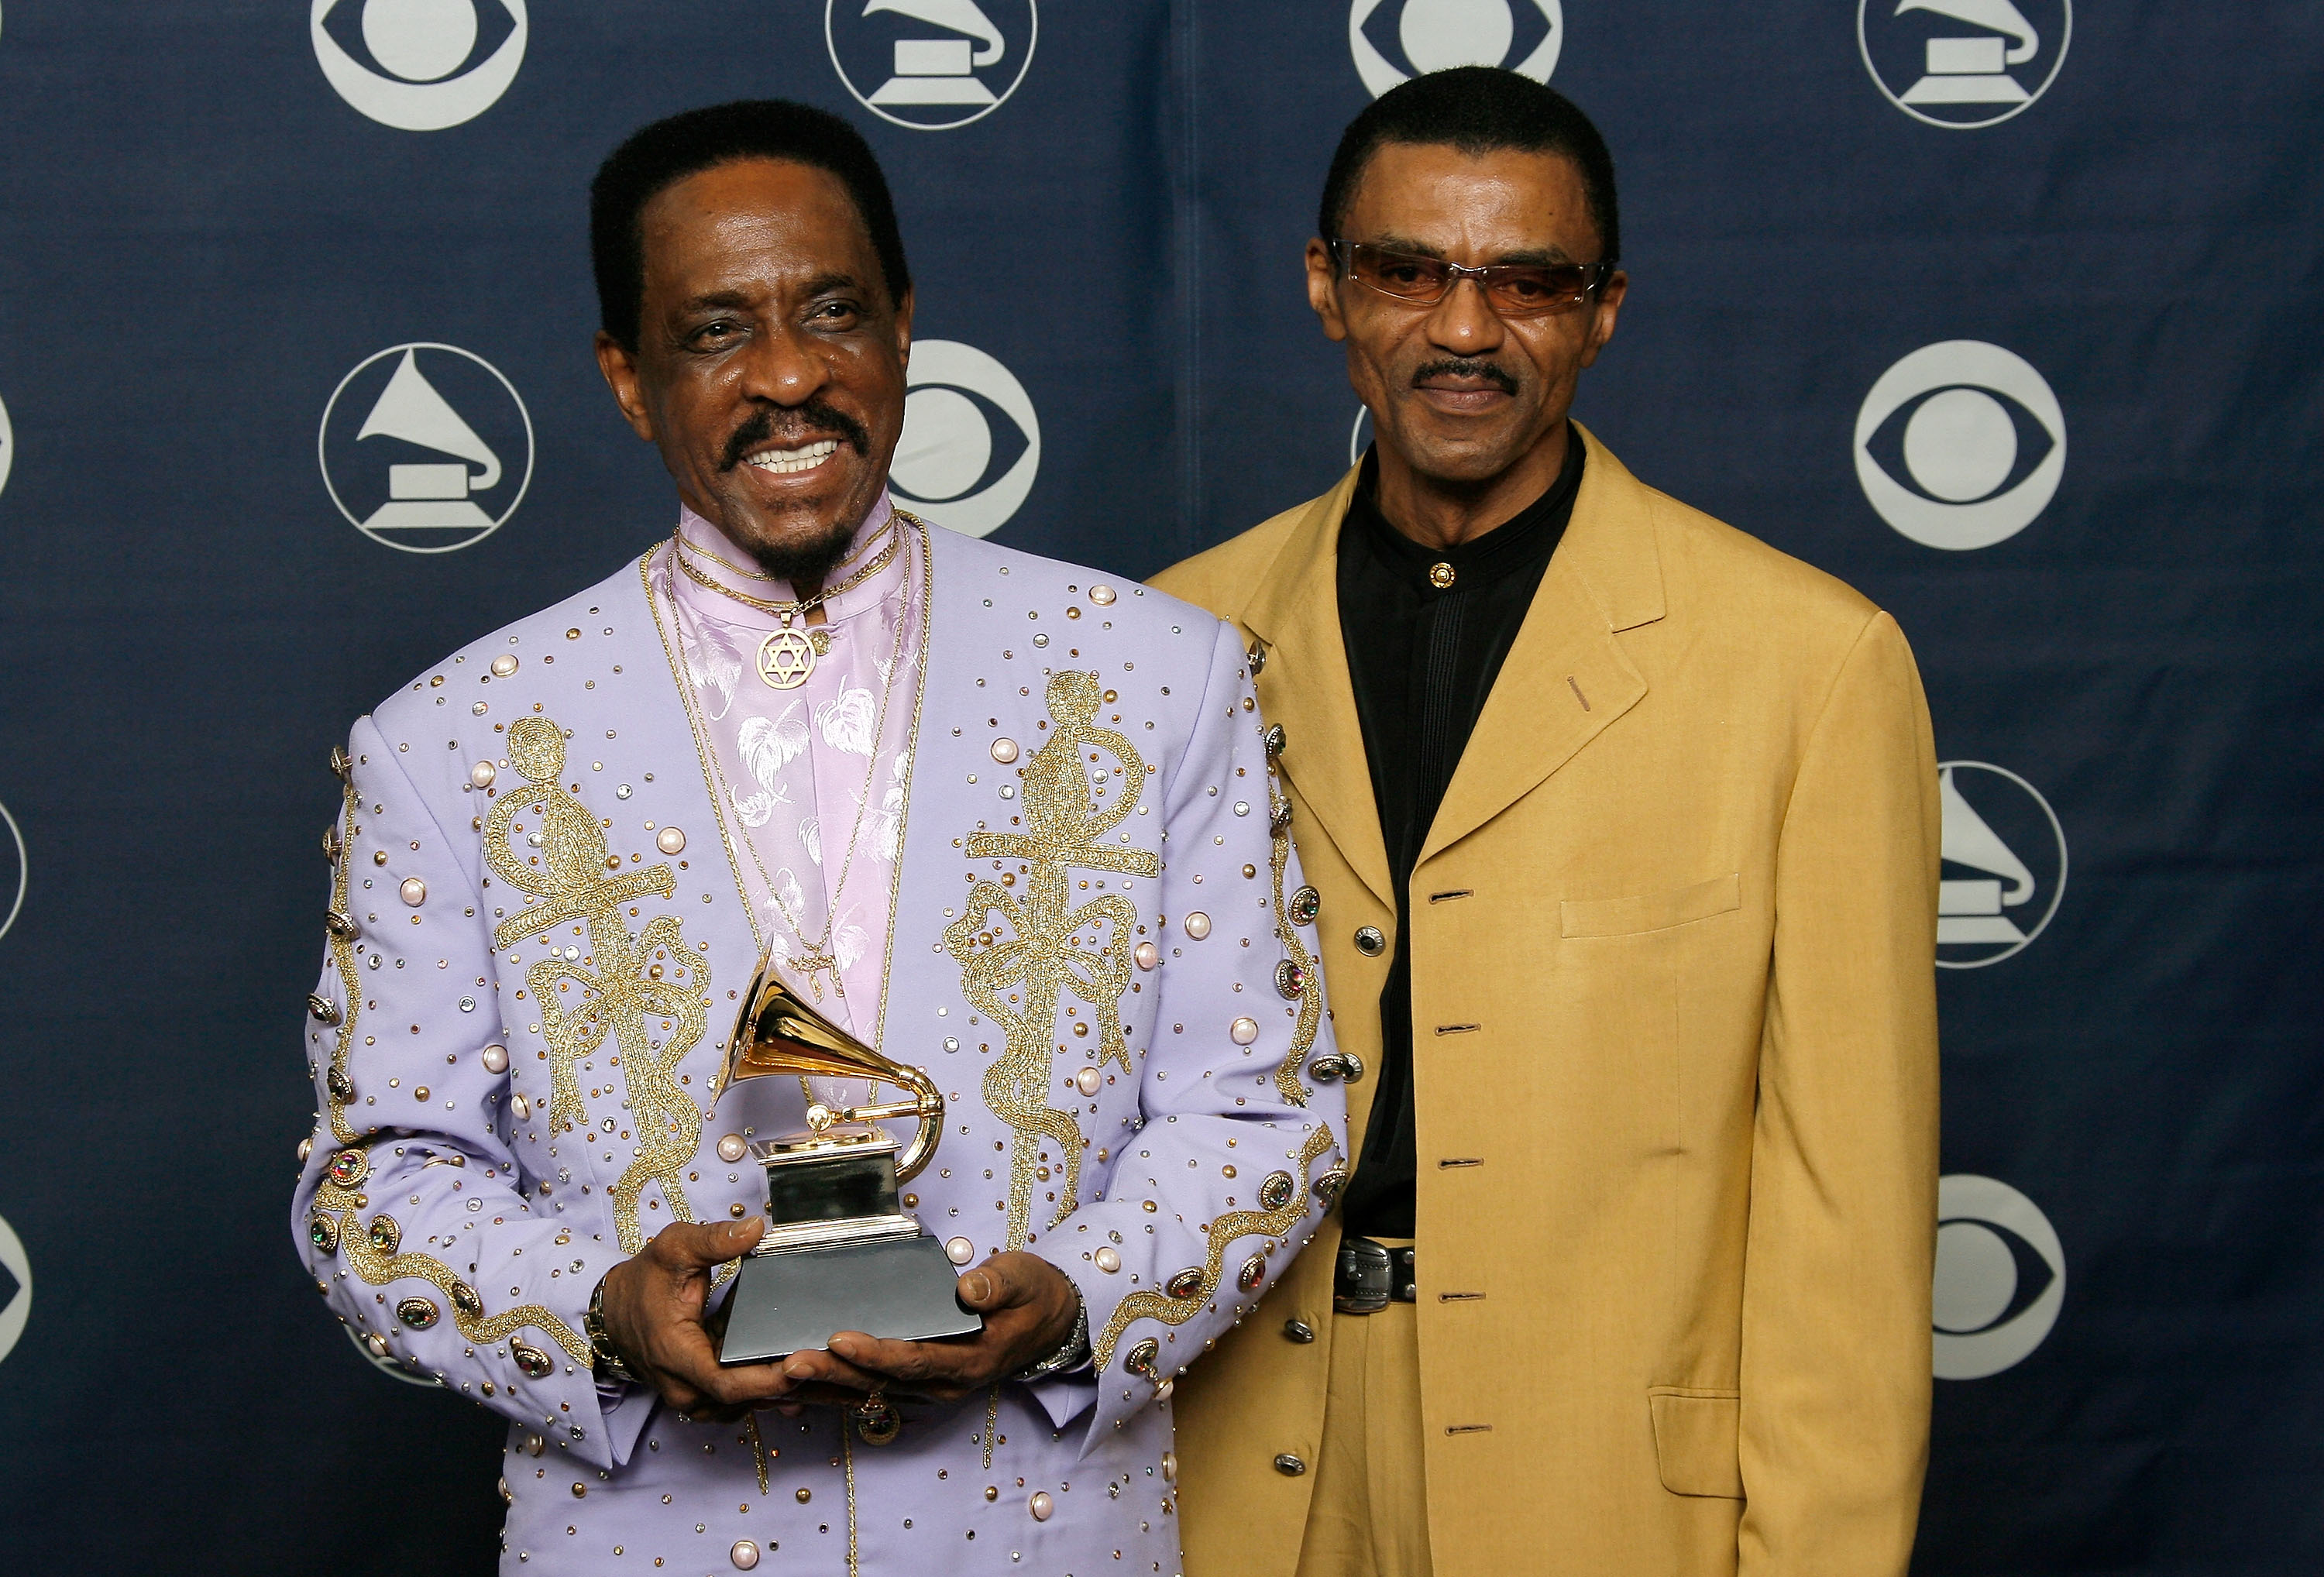 Ike Turner (L) and Ike Turner Jr. (R) pose with his Grammy for Best Traditional Blues Album for "Risin' With The Blues" in the press room at the 49th Annual Grammy Awards at the Staples Center on February 11, 2007 in Los Angeles, California. | Source: Getty Images